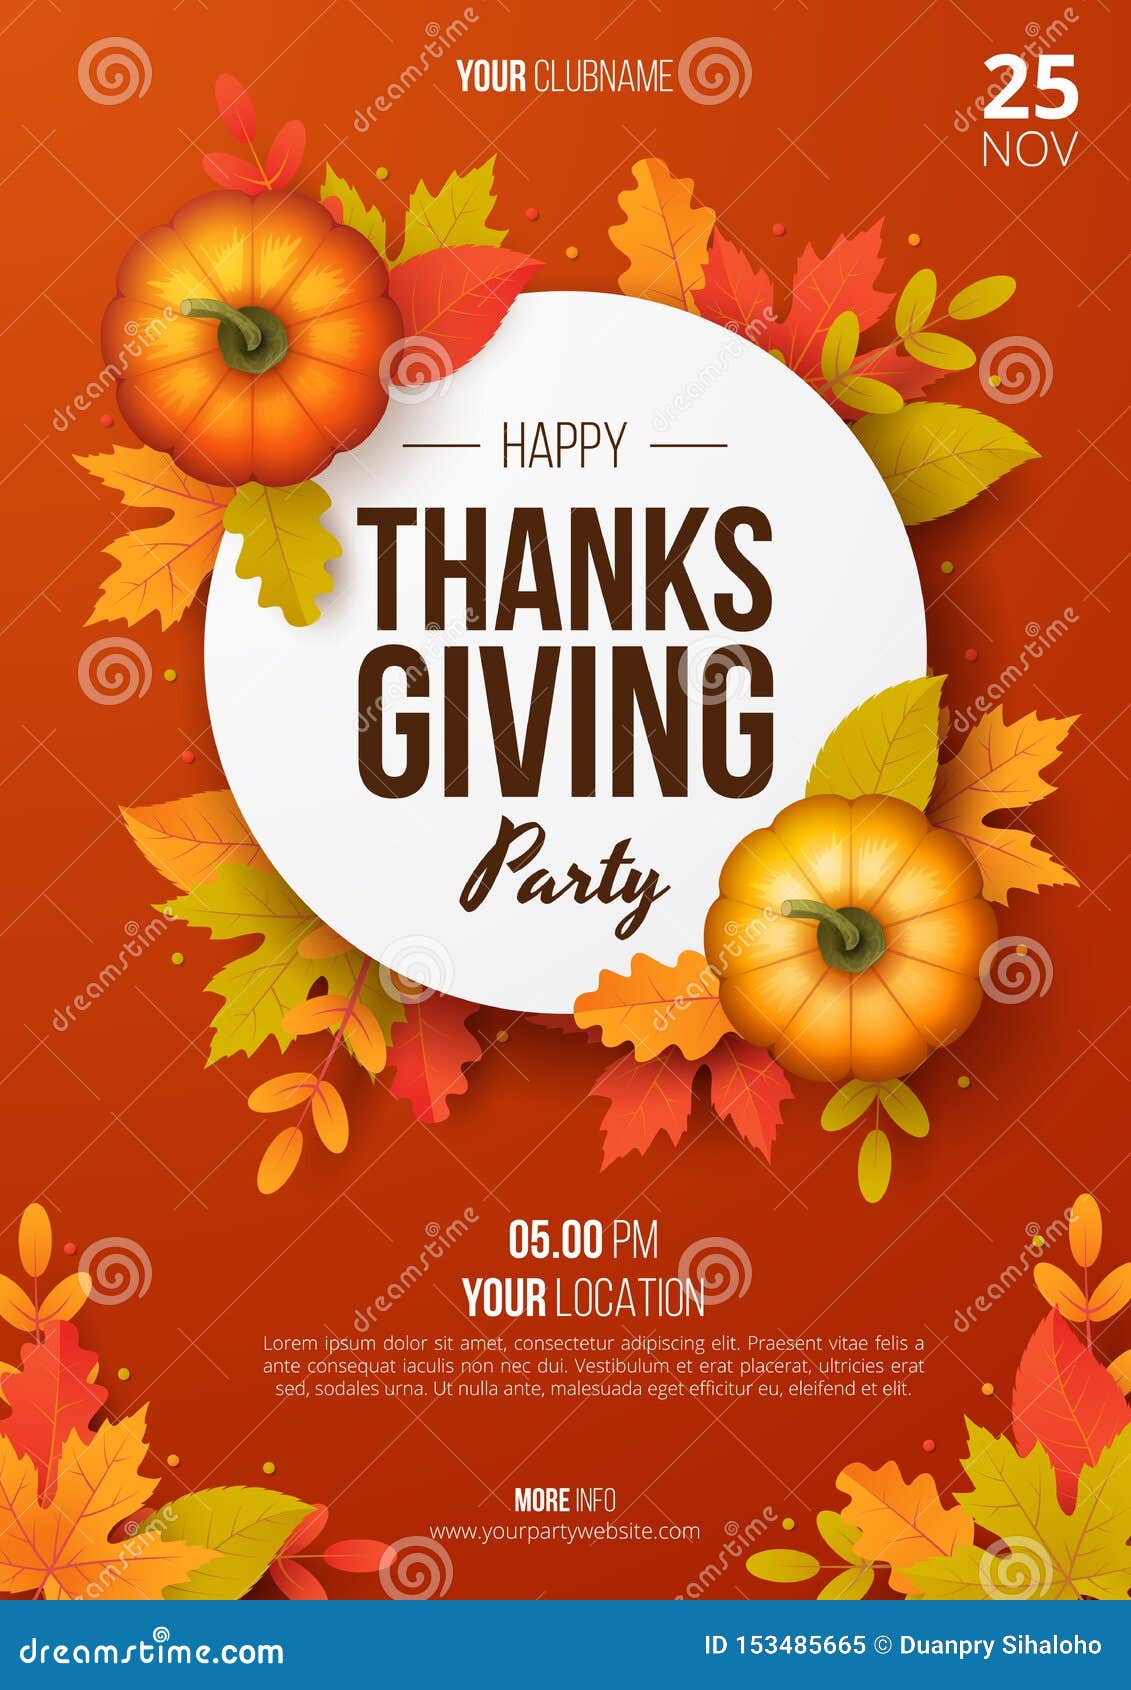 Happy Thanksgiving Day poster  Thanksgiving poster, Happy thanksgiving  images, Thanksgiving greetings